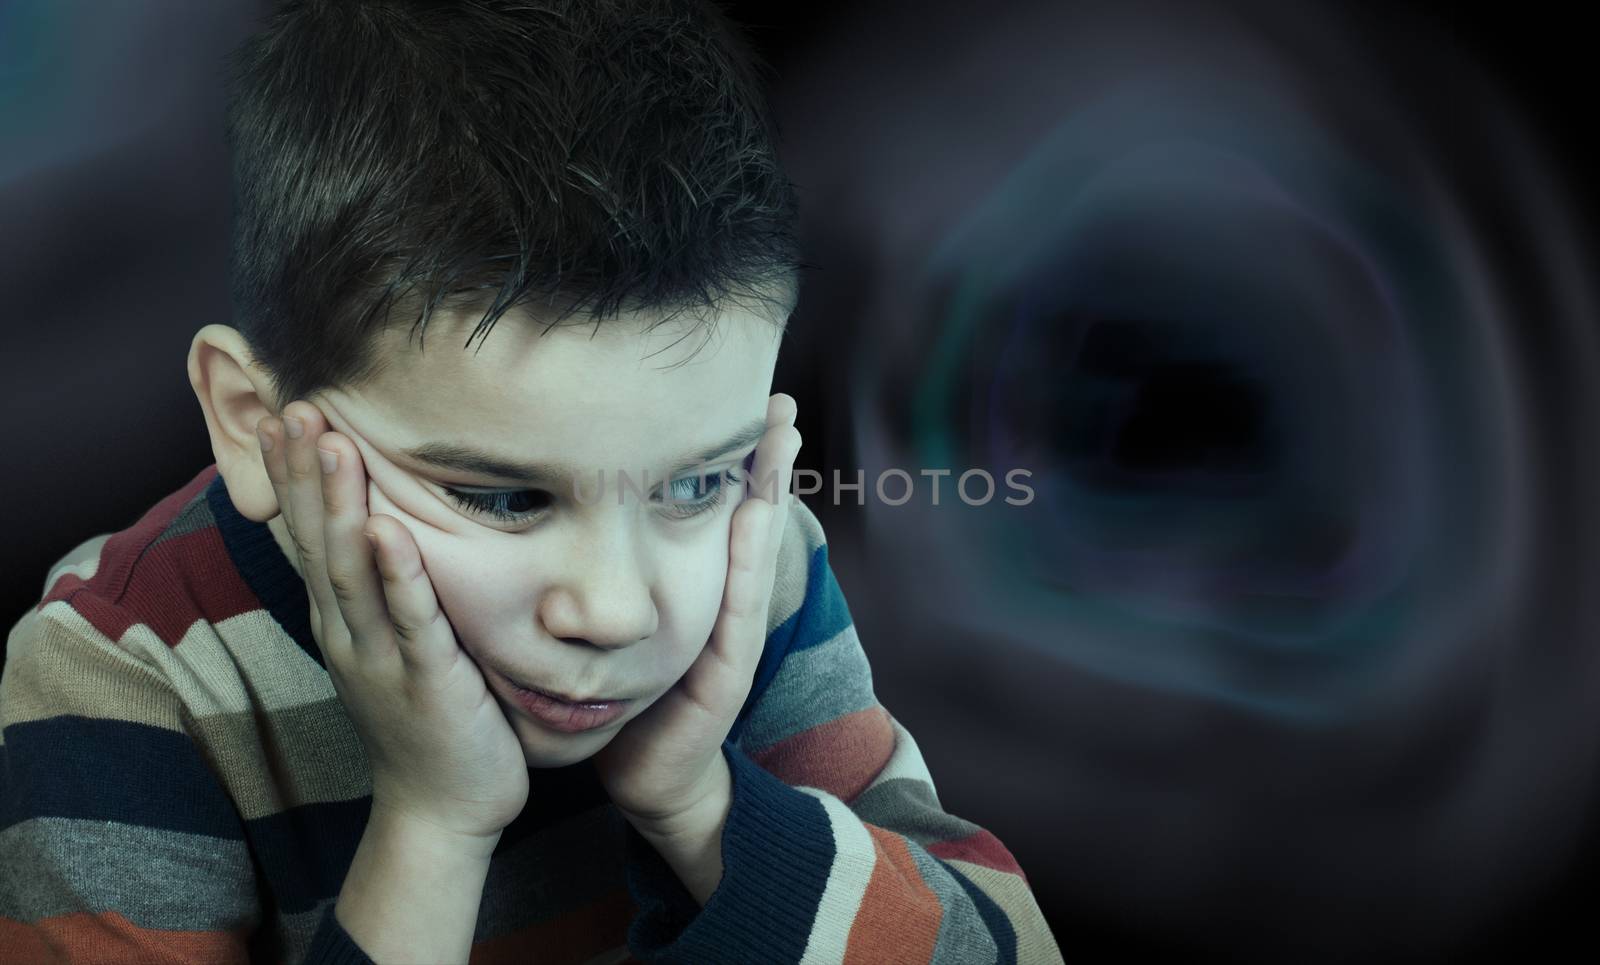 Sad child has problems. Black abstract shapes background deep